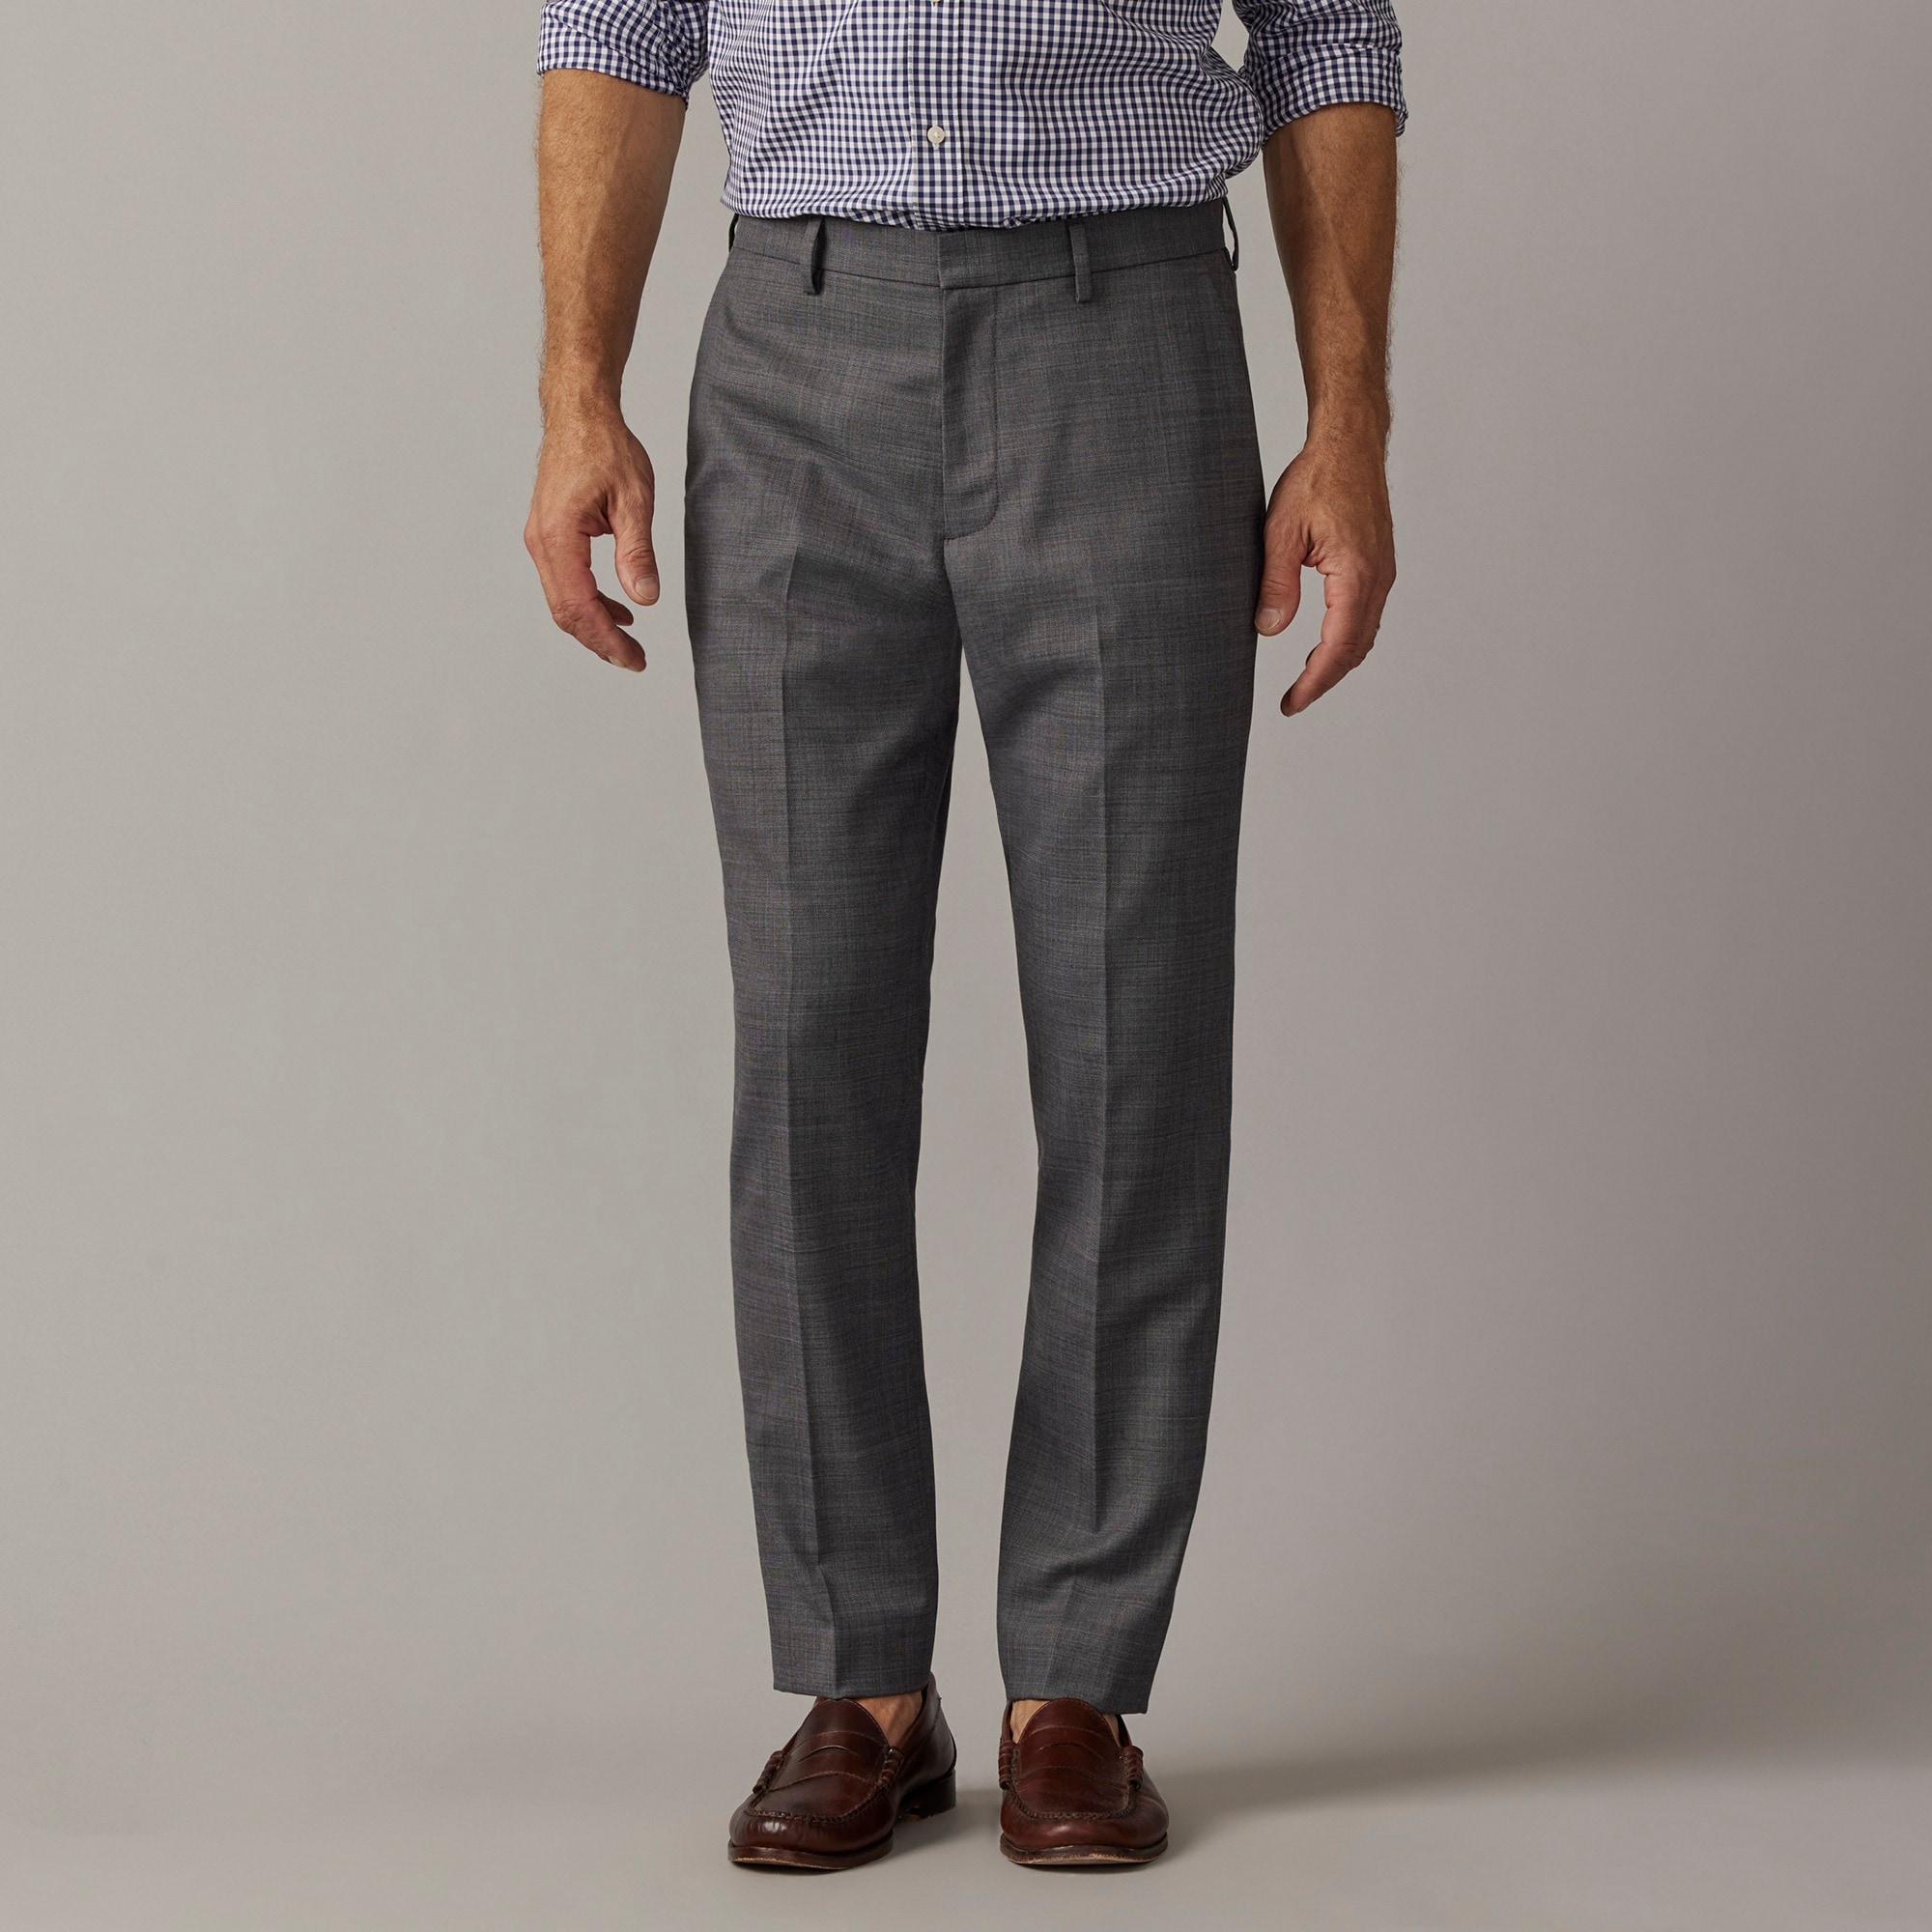  Bowery dress pant in wool blend